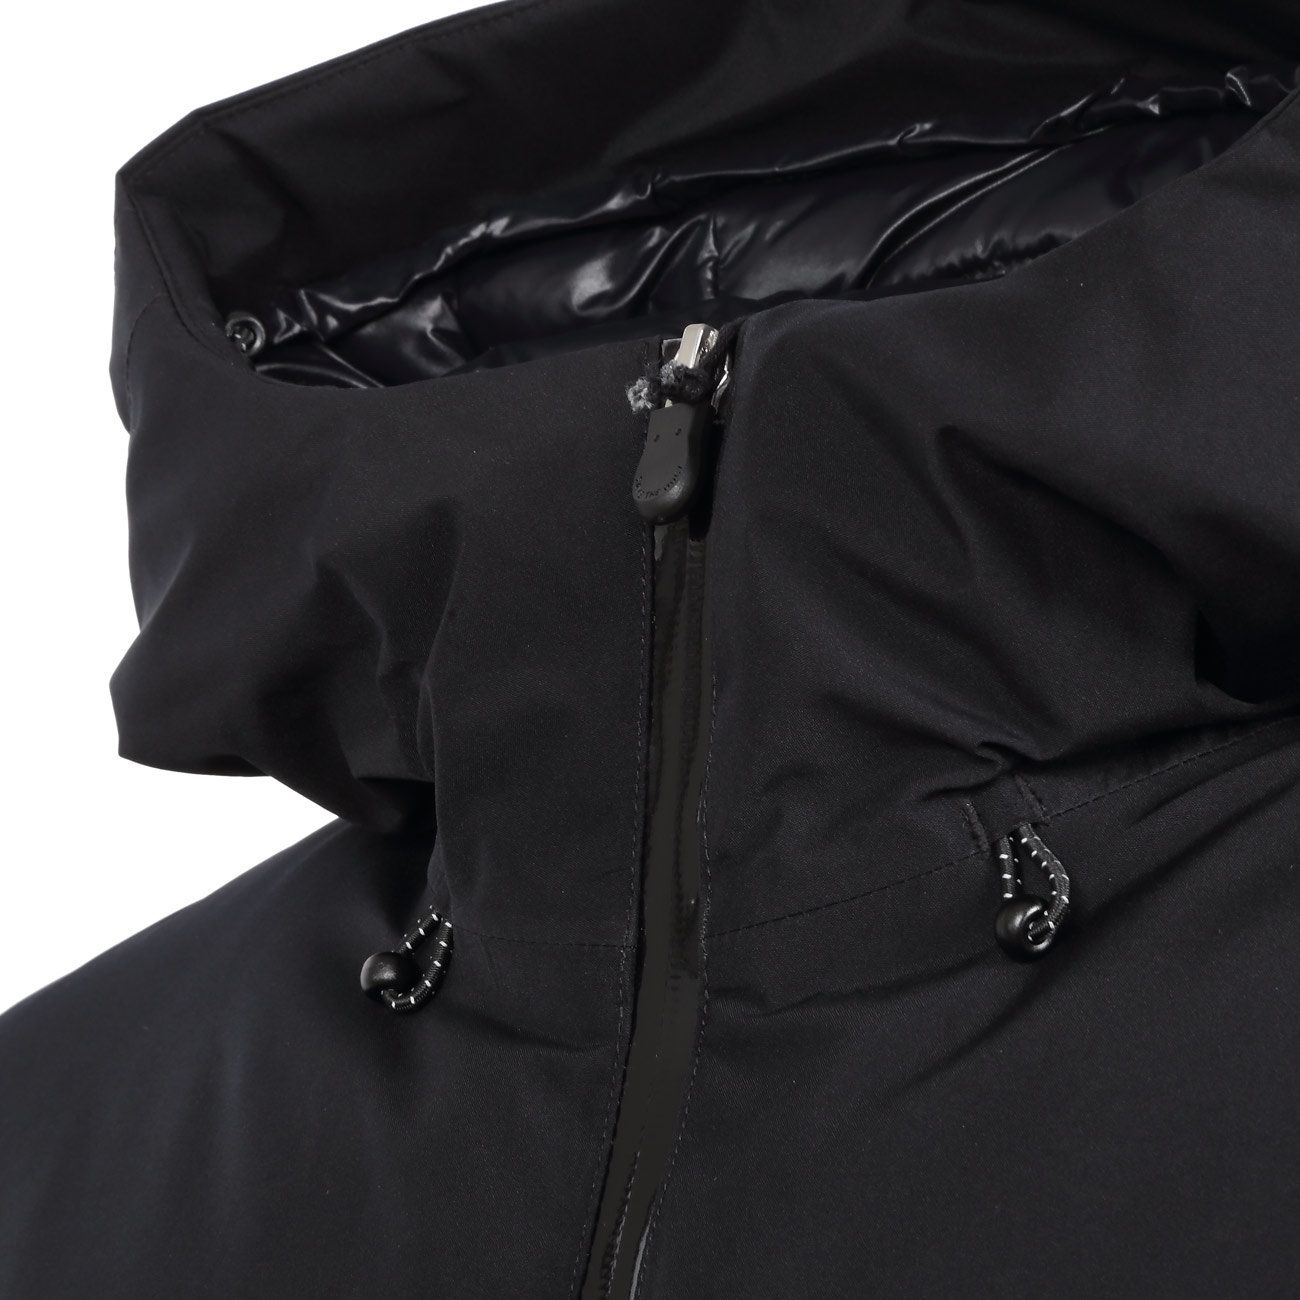 SAVE THE DUCK GORETEX JACKET WITH FULLZIP AND HOOD Man Black